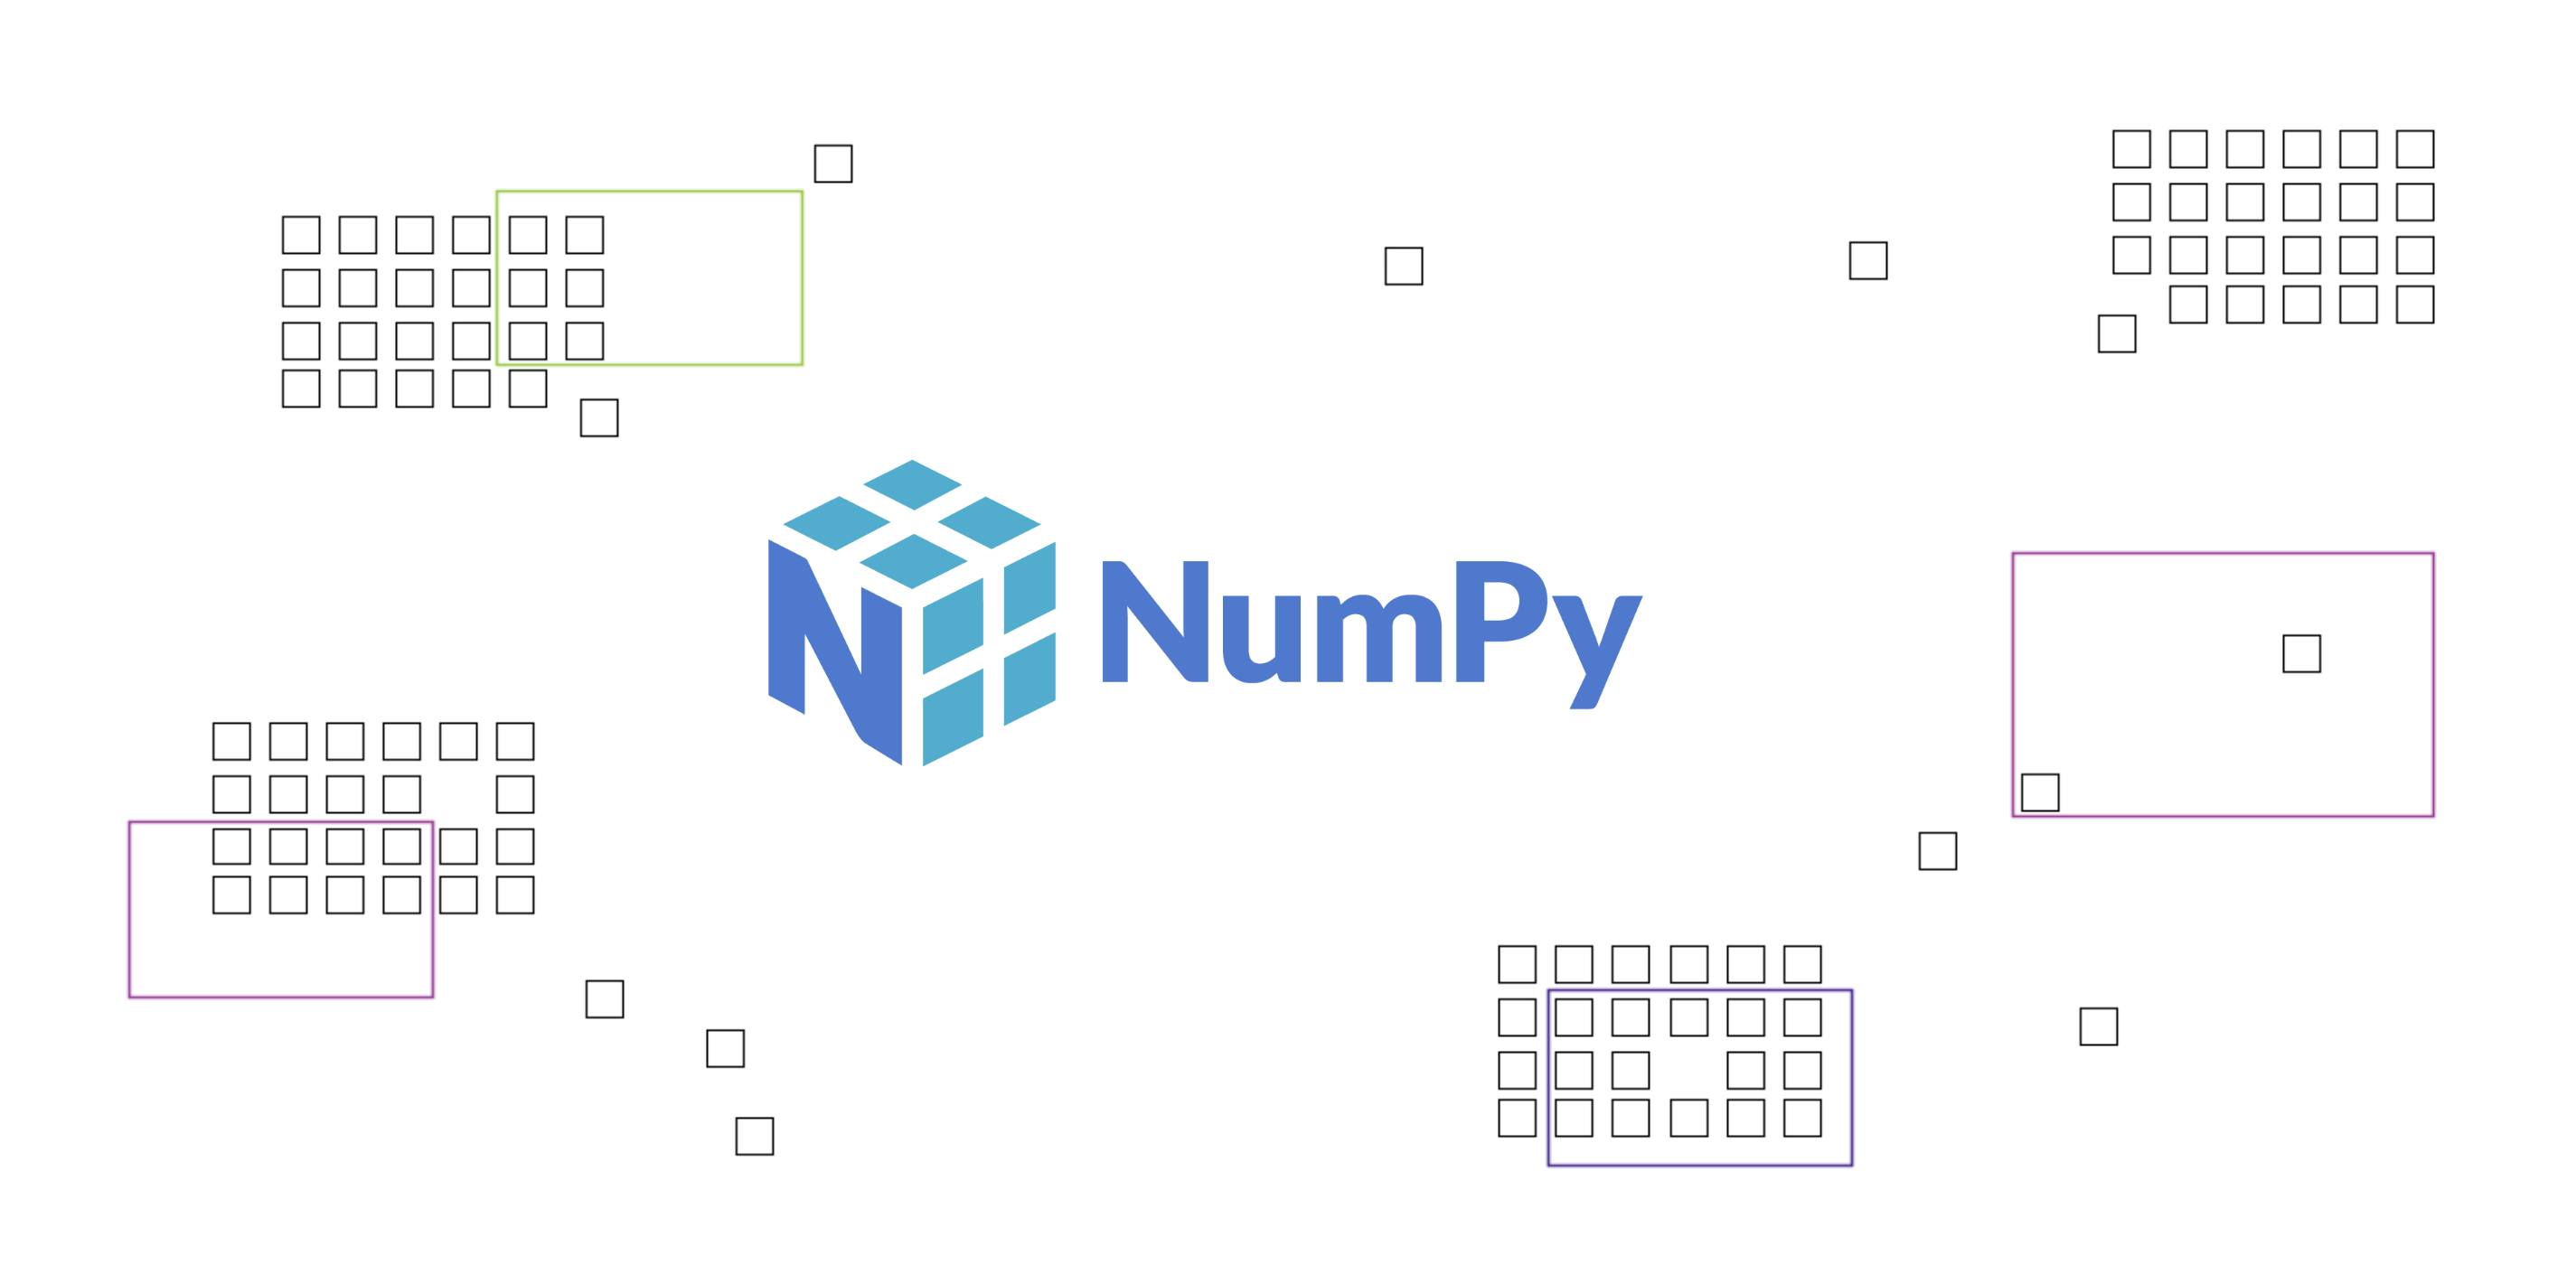 ALL ABOUT NUMPY